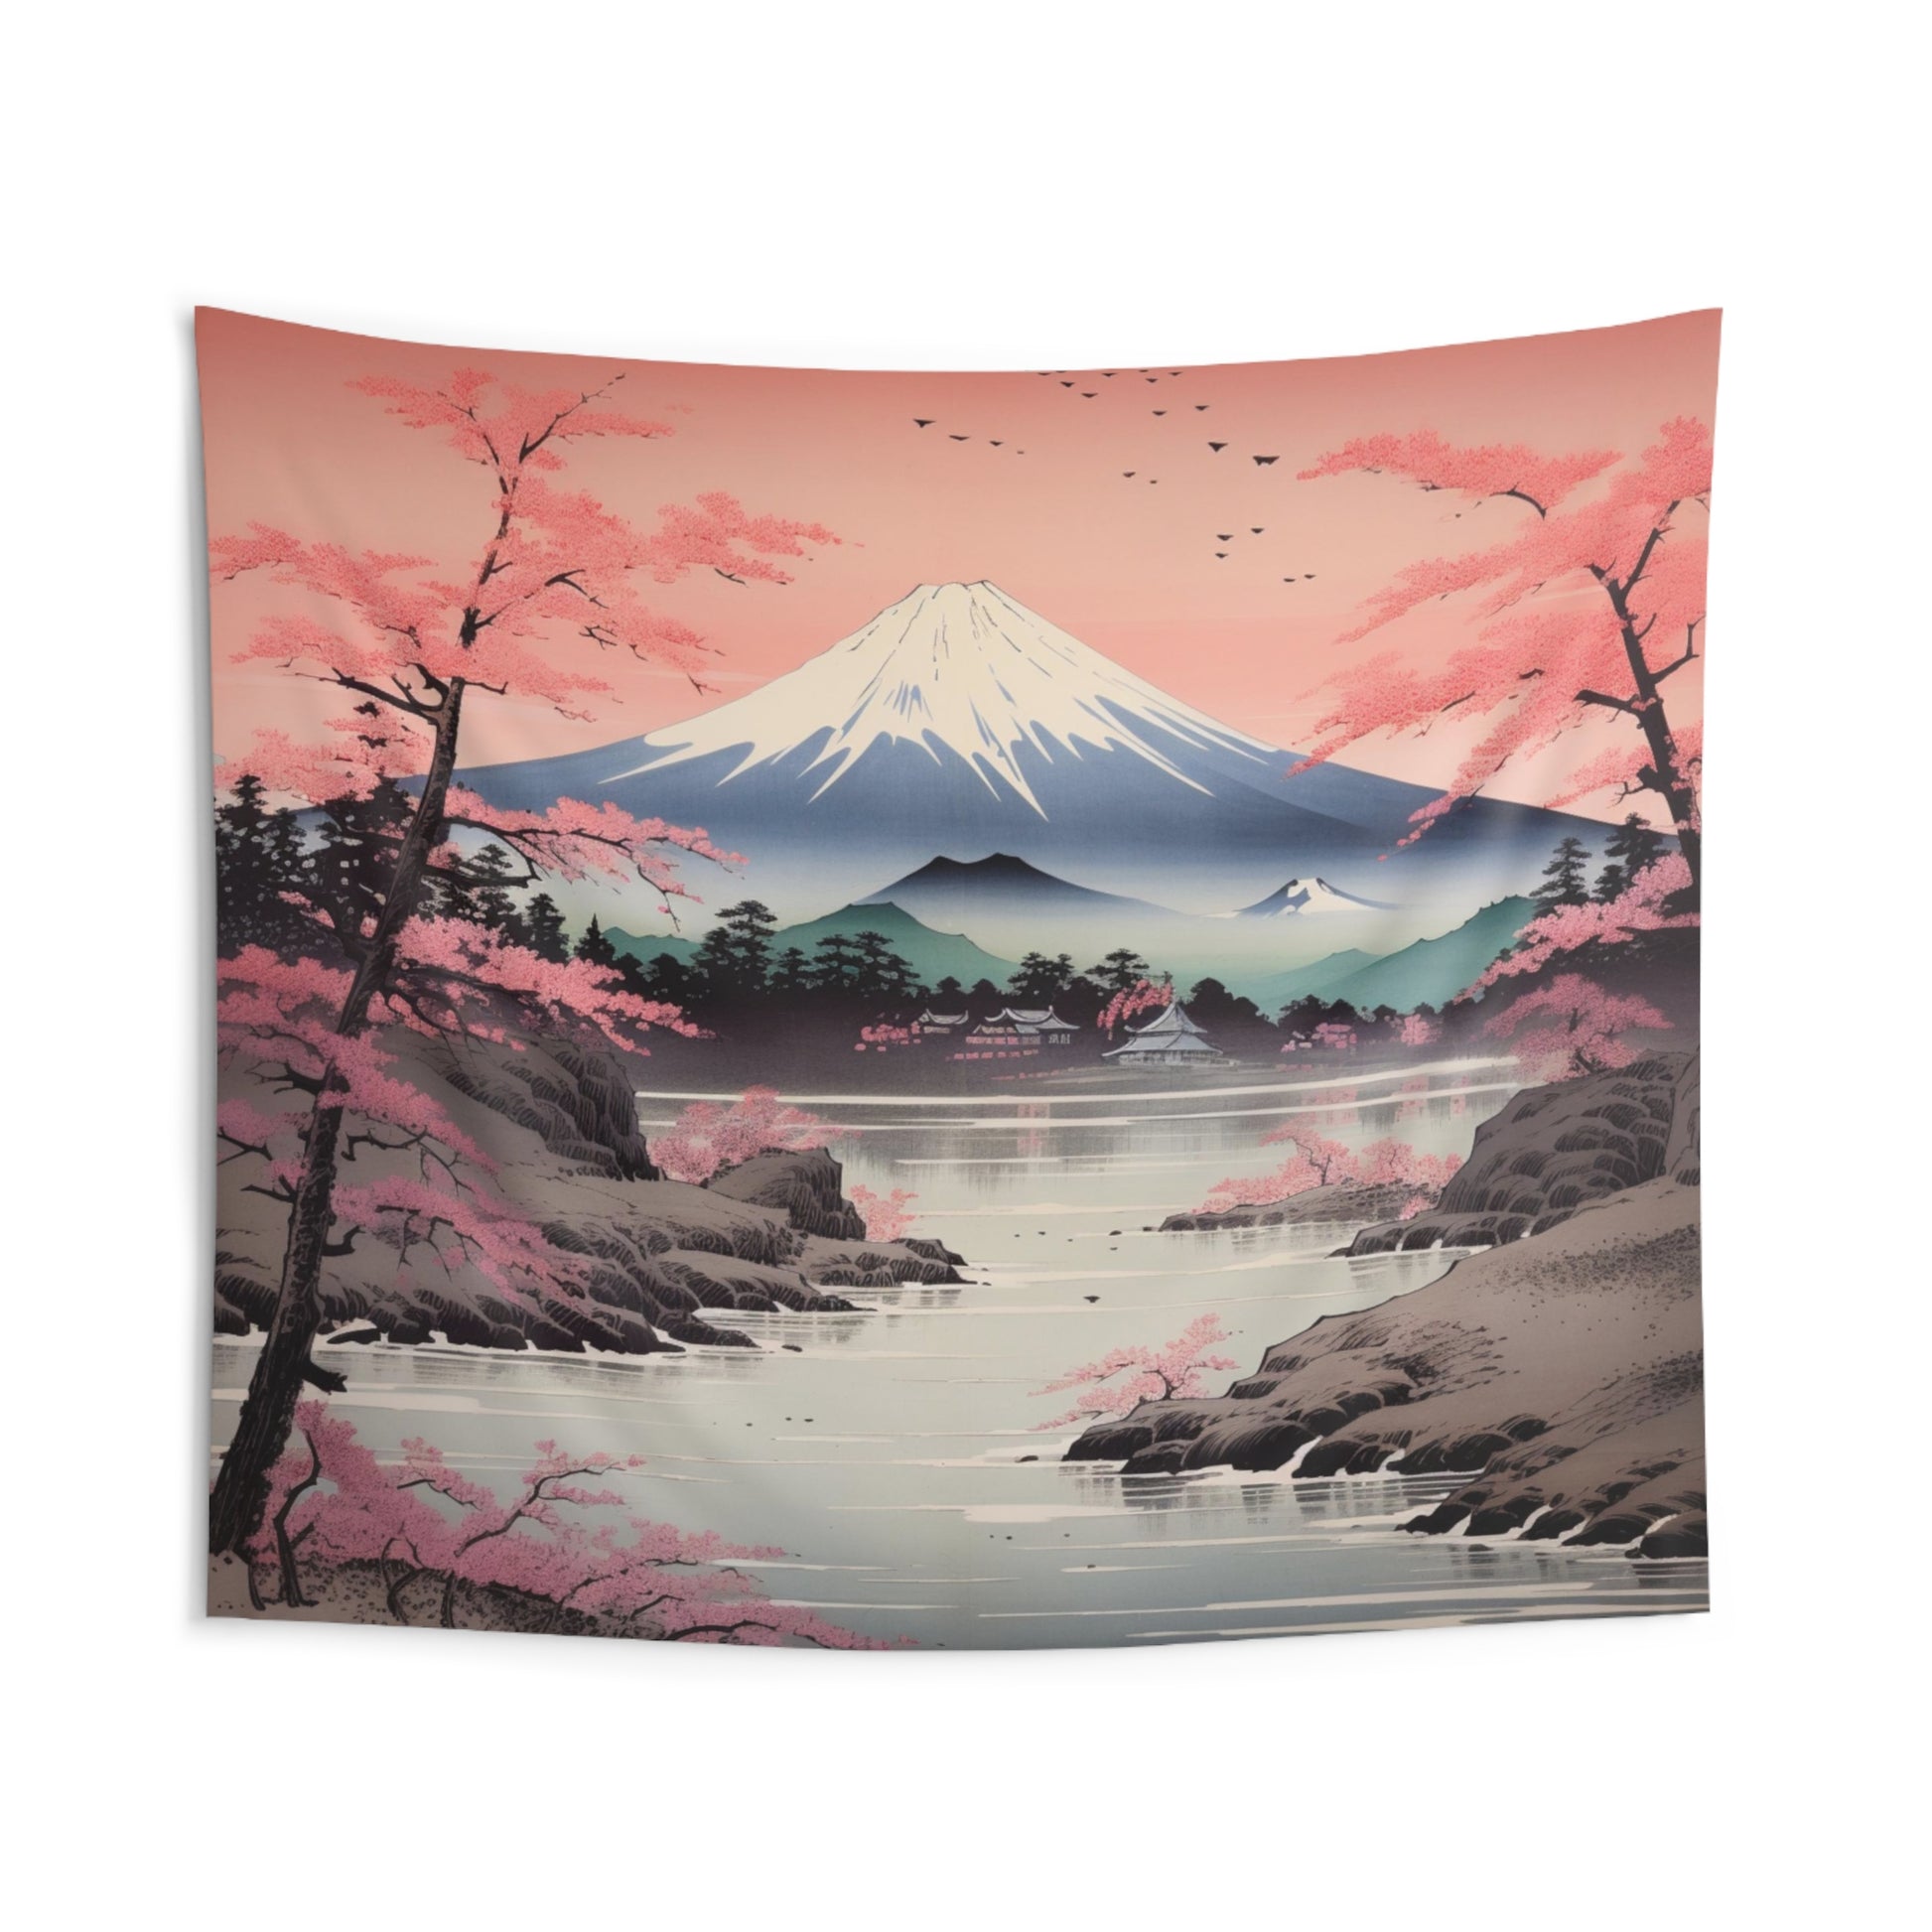 Japanese Tapestry, Mount Fuji Cherry Blossoms Pink Wall Art Hanging Cool Unique Landscape Aesthetic Large Small Bedroom College Dorm Starcove Fashion